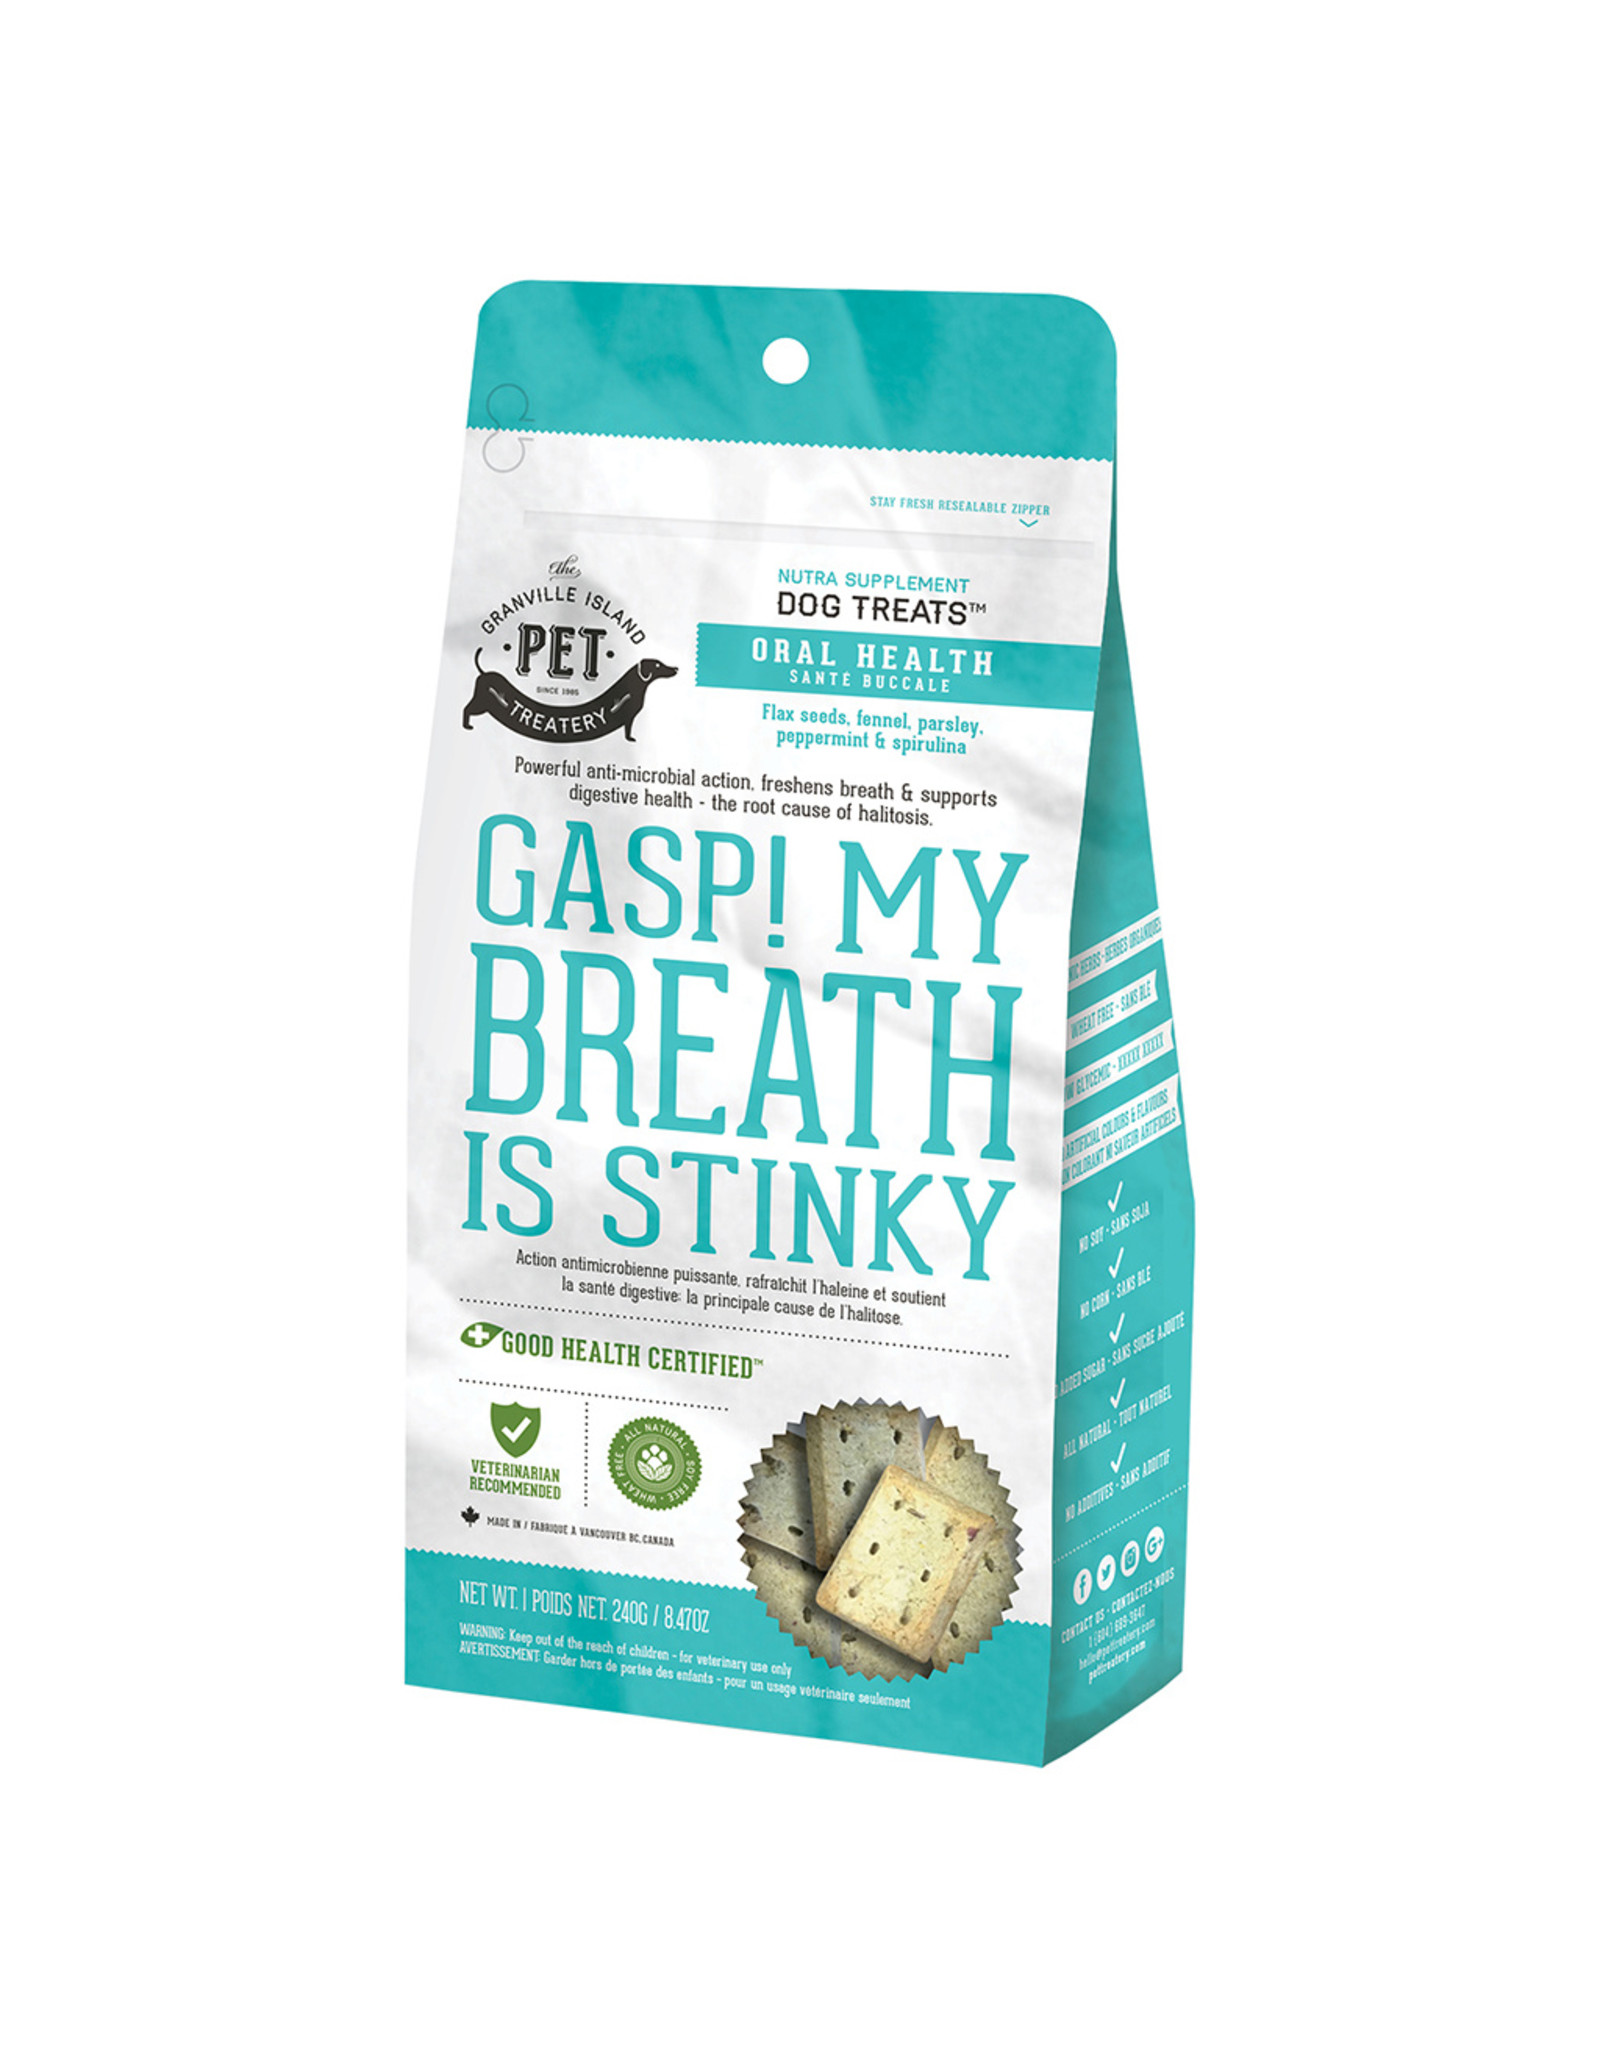 Granville Island Pet Gasp! My Breath is Stinky 240GM